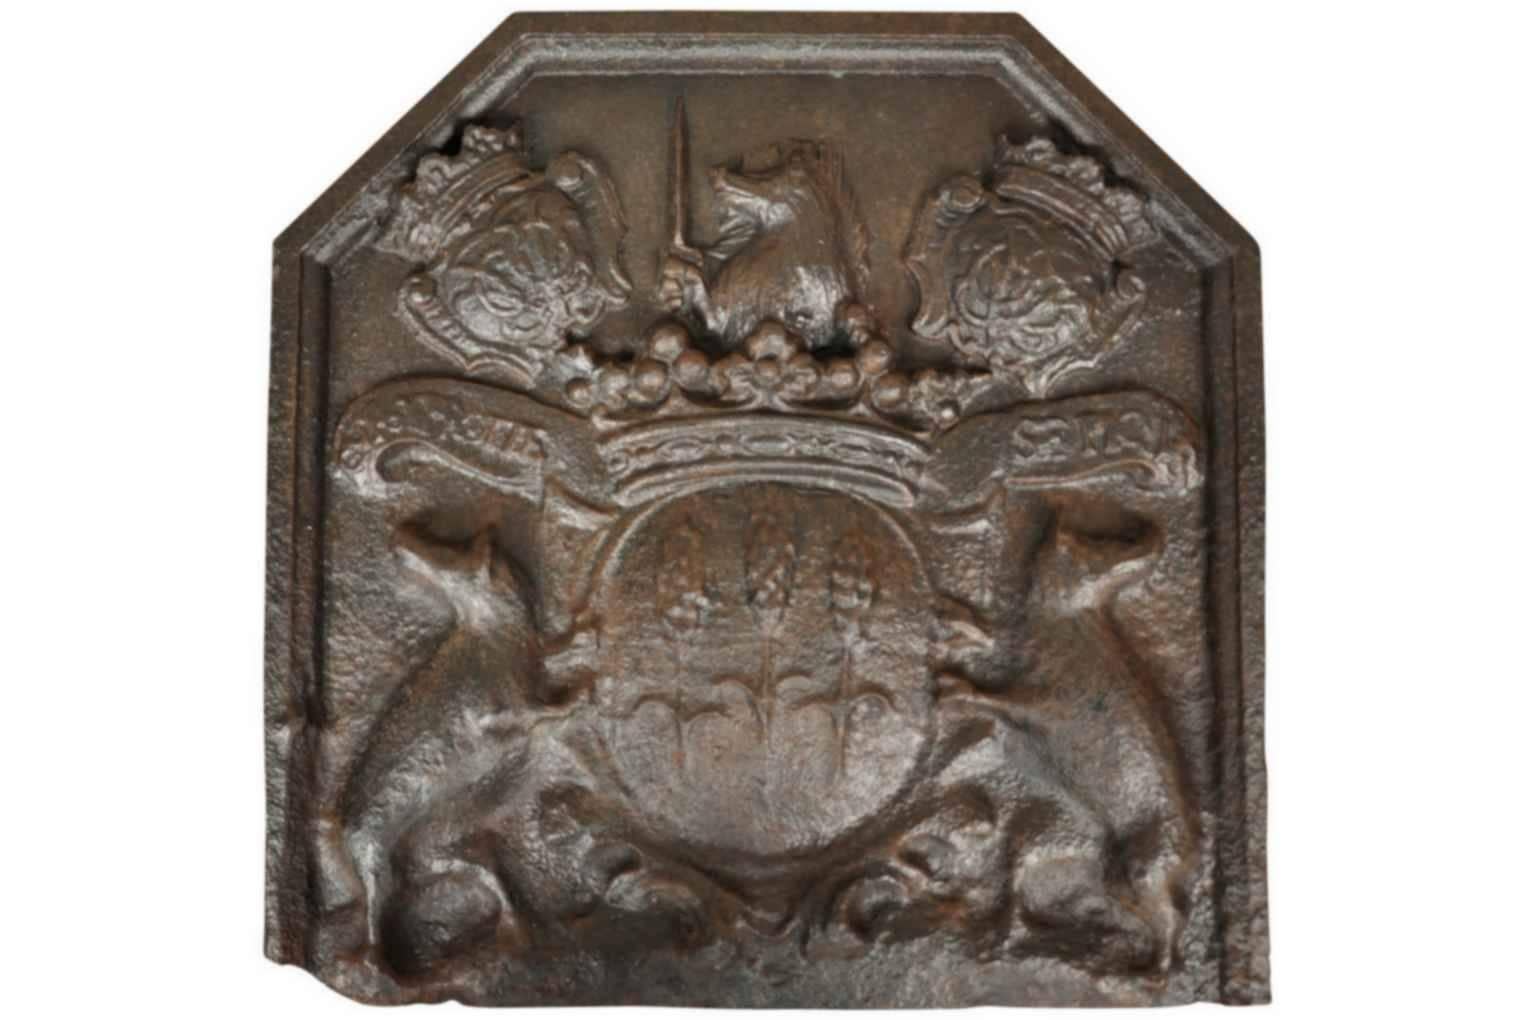 An exceptional 17th century French fireback in cast iron. A luxury item that served not only to adorn the fireplace, but to protect the backwall of the fireplace and to radiate heat outwards. Decorated with a family crest or Blason. Firebacks also